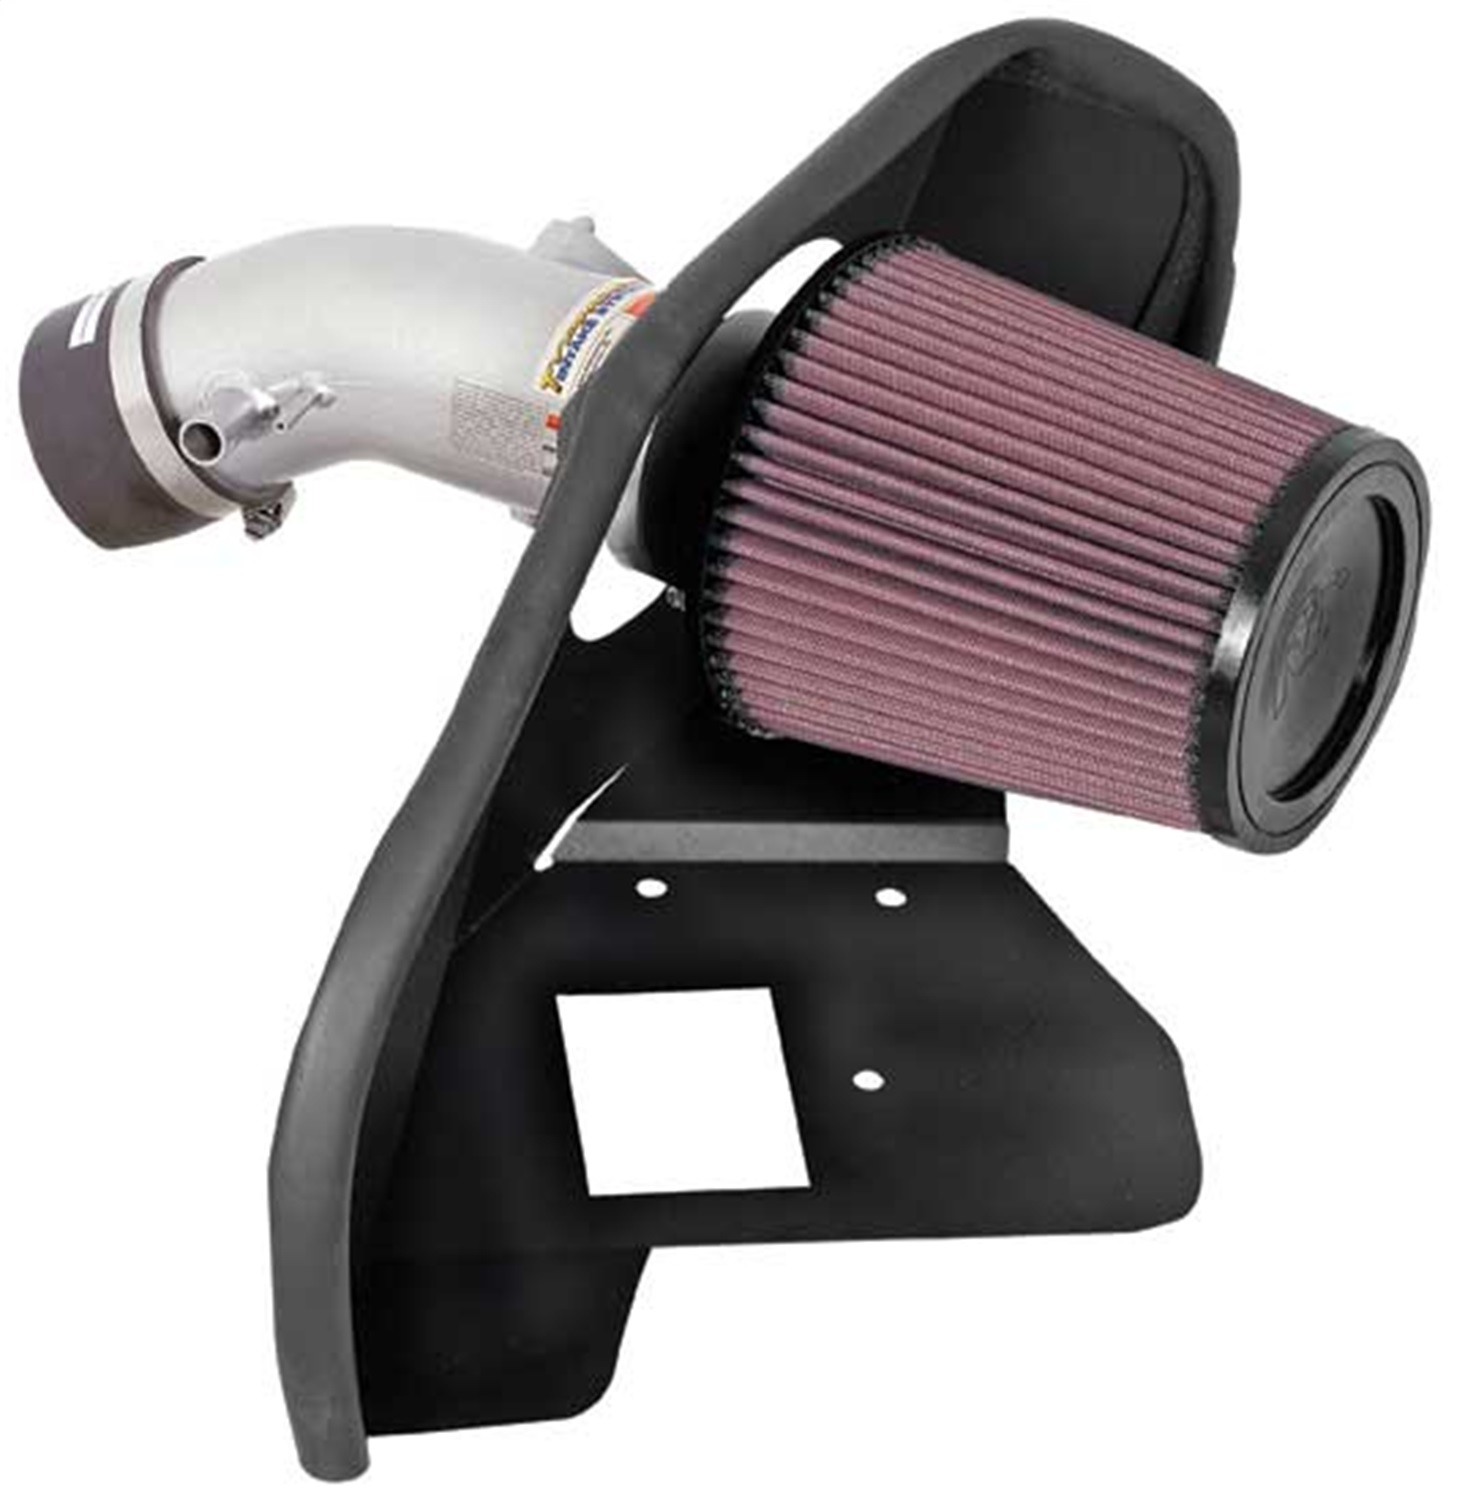 K&N Filters K&N Filters 69-8611TS Typhoon; Cold Air Intake Filter Assembly Fits Camry Venza